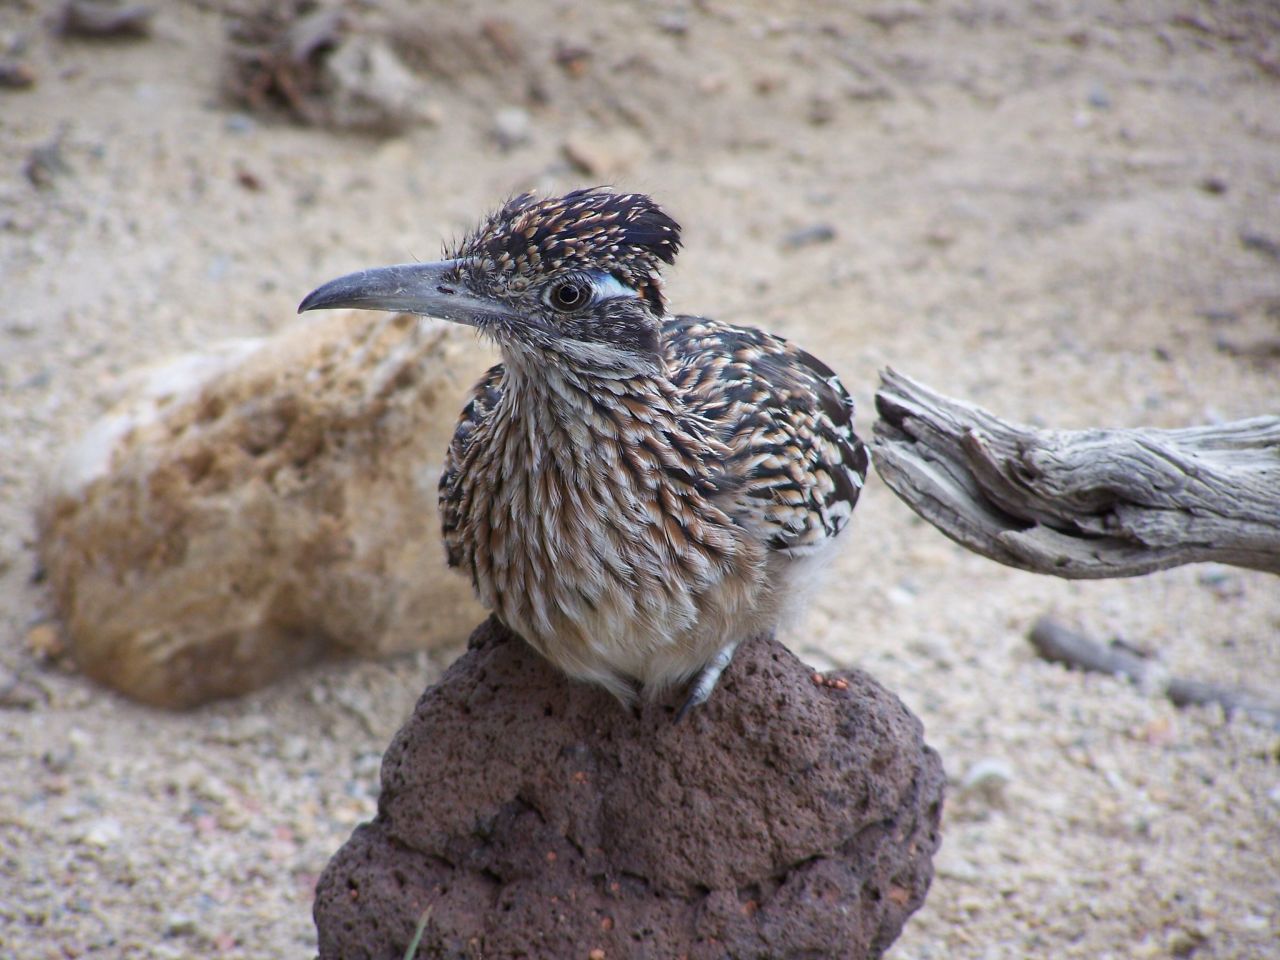  A roadrunner takes a break in <a href="http://ireport.cnn.com/docs/DOC-1032328">Wanda Gemson</a>'s yard. These birds don't do much flying, but they can run at speeds of up to 20 mph. Meep meep!